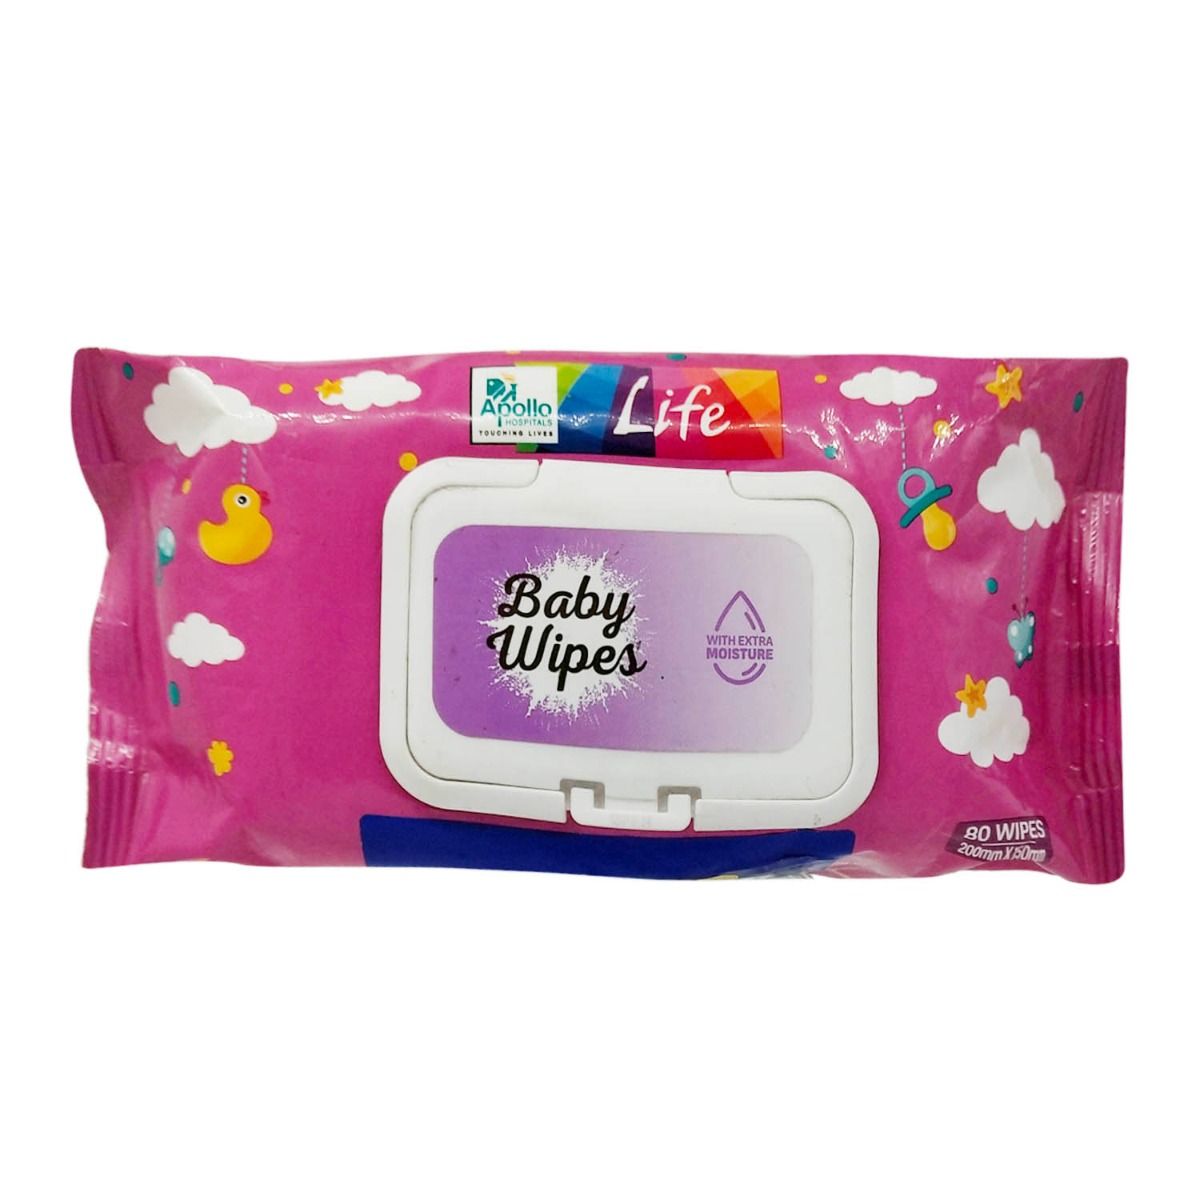 Apollo Life Baby Wipes, 160 Count (2 x 80 Wipes), Pack of 1 